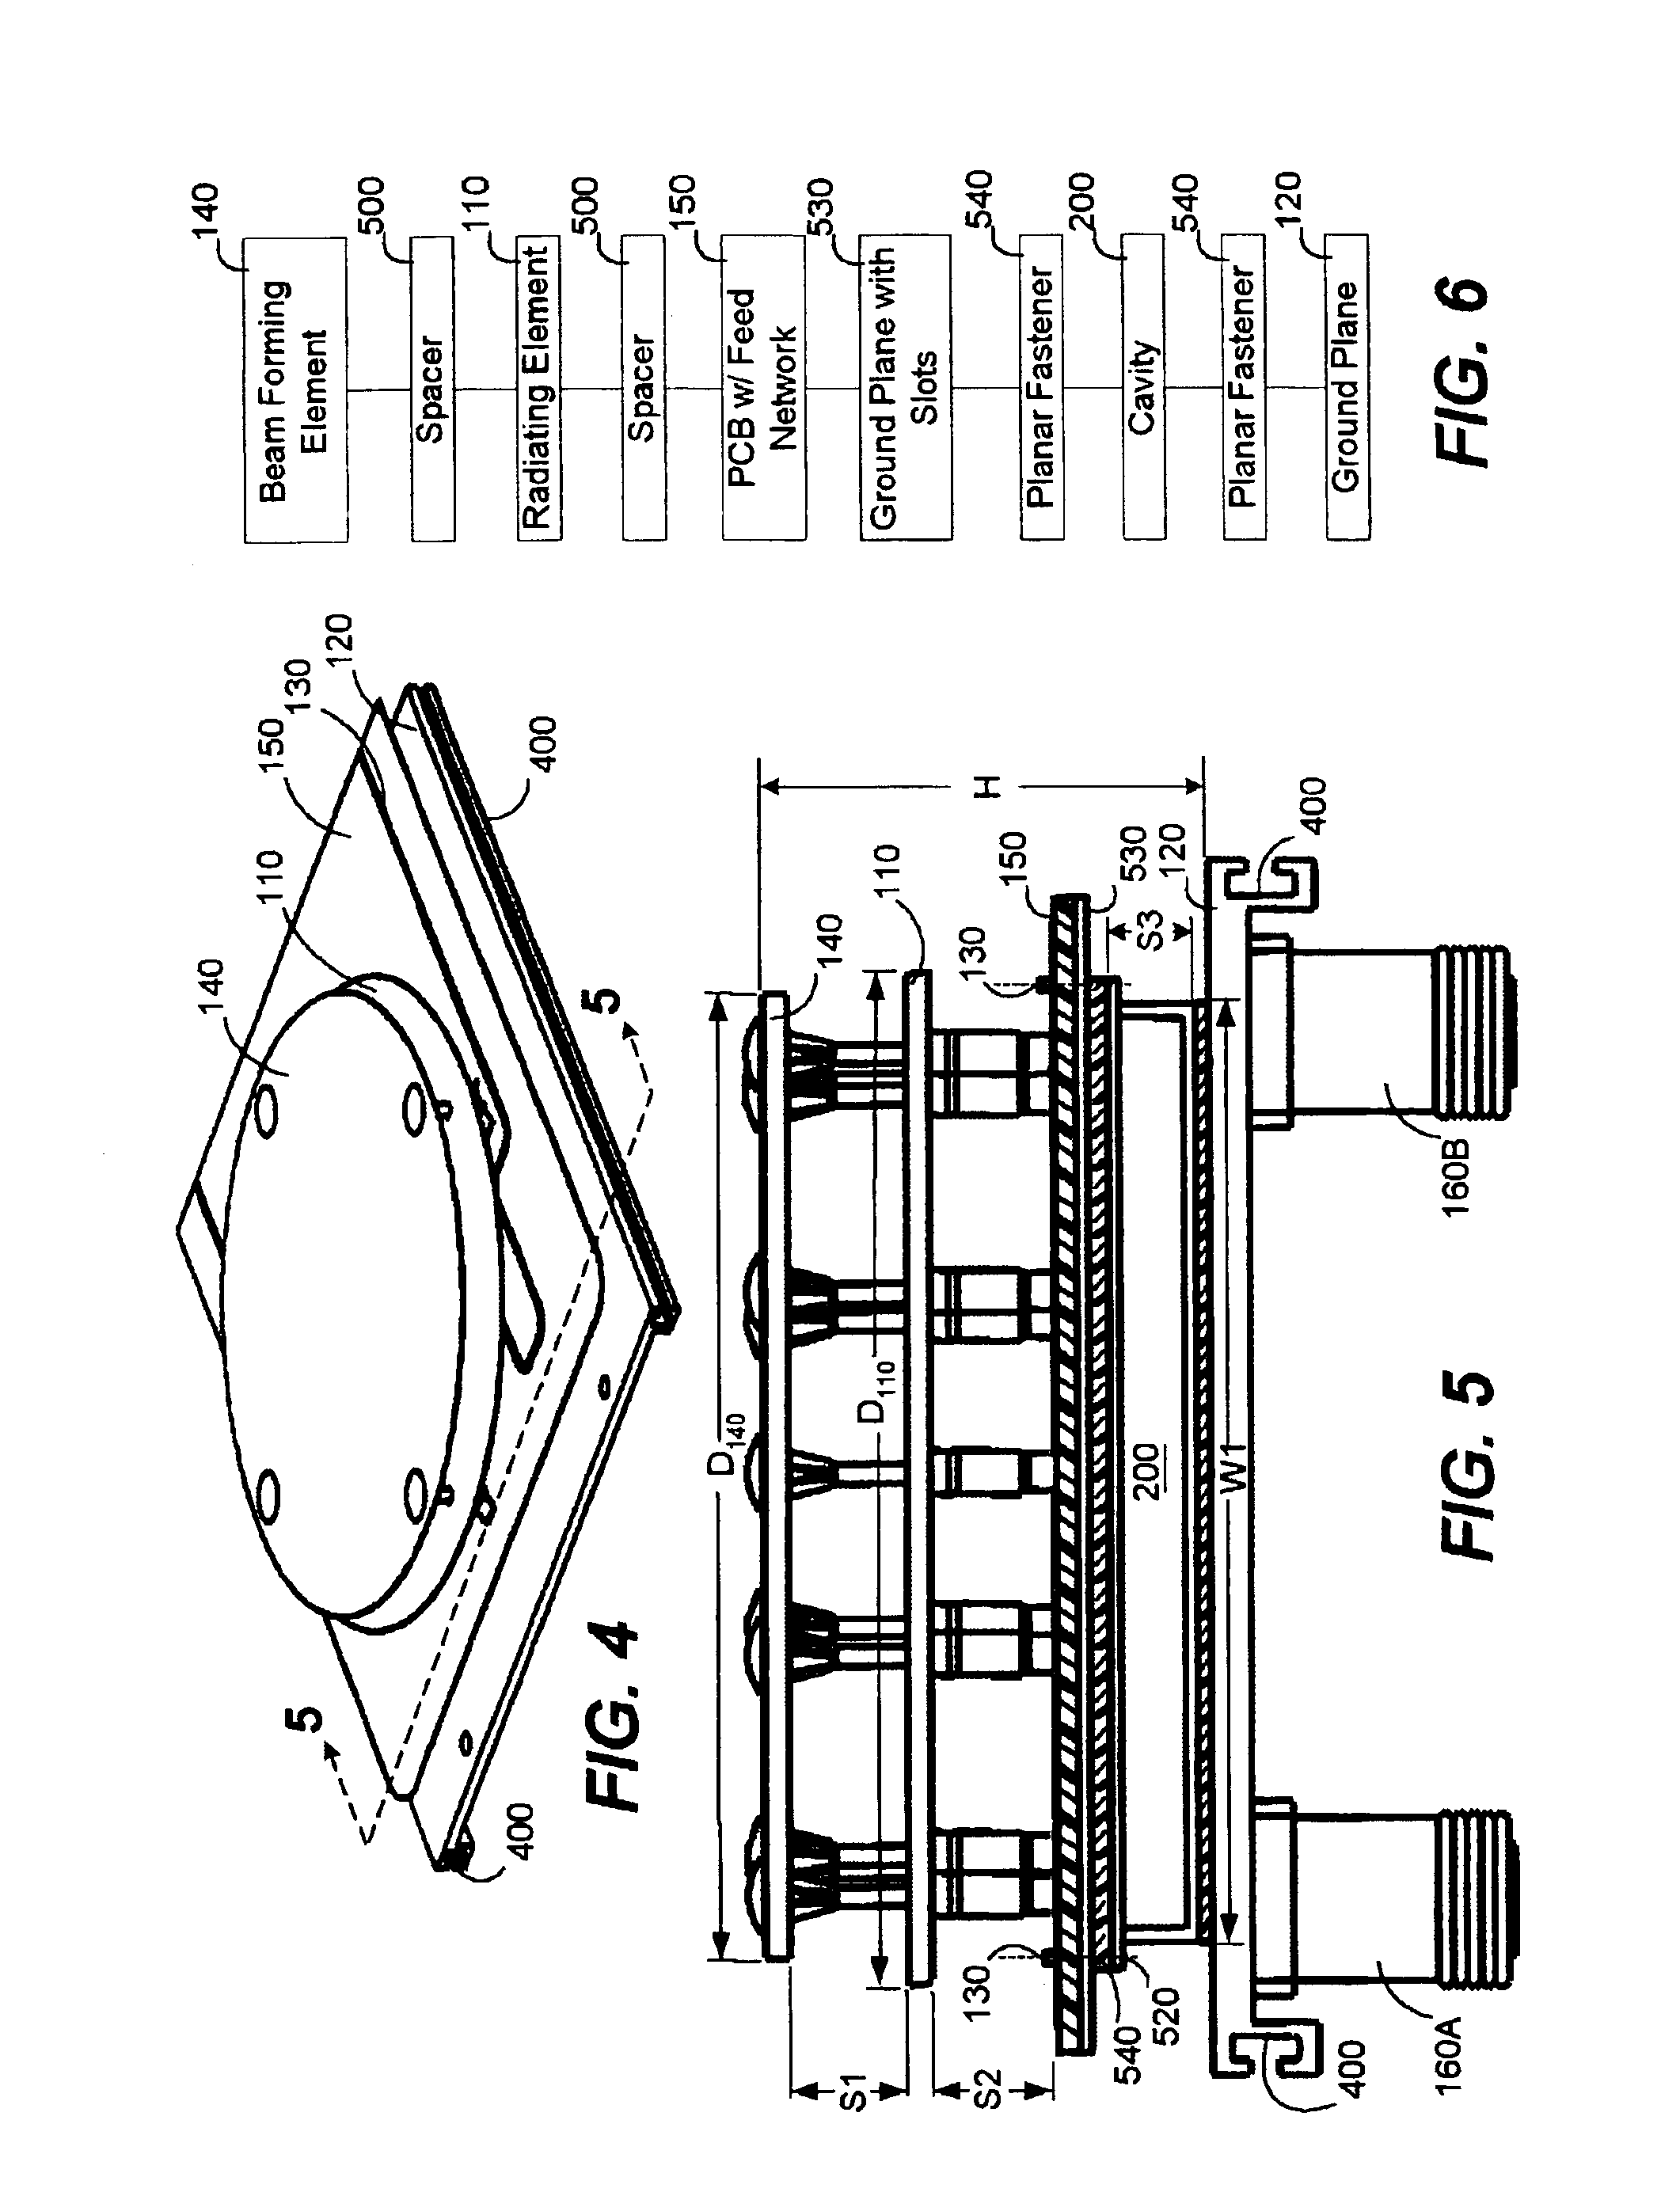 Patch and cavity for producing dual polarization states with controlled RF beamwidths